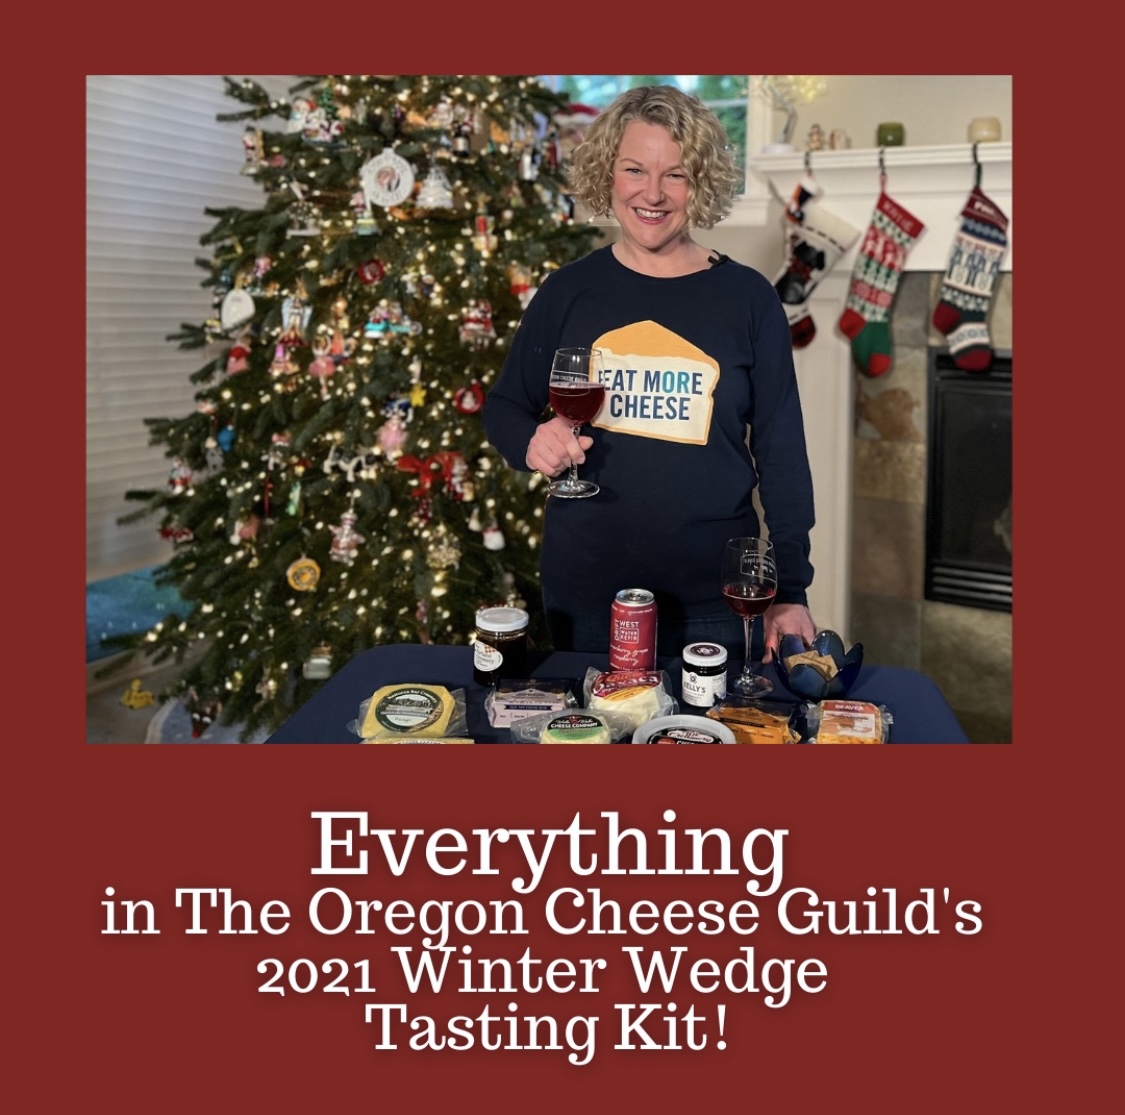 Everything in The Oregon Cheese Guild's 2021 Winter Wedge Tasting Kit!